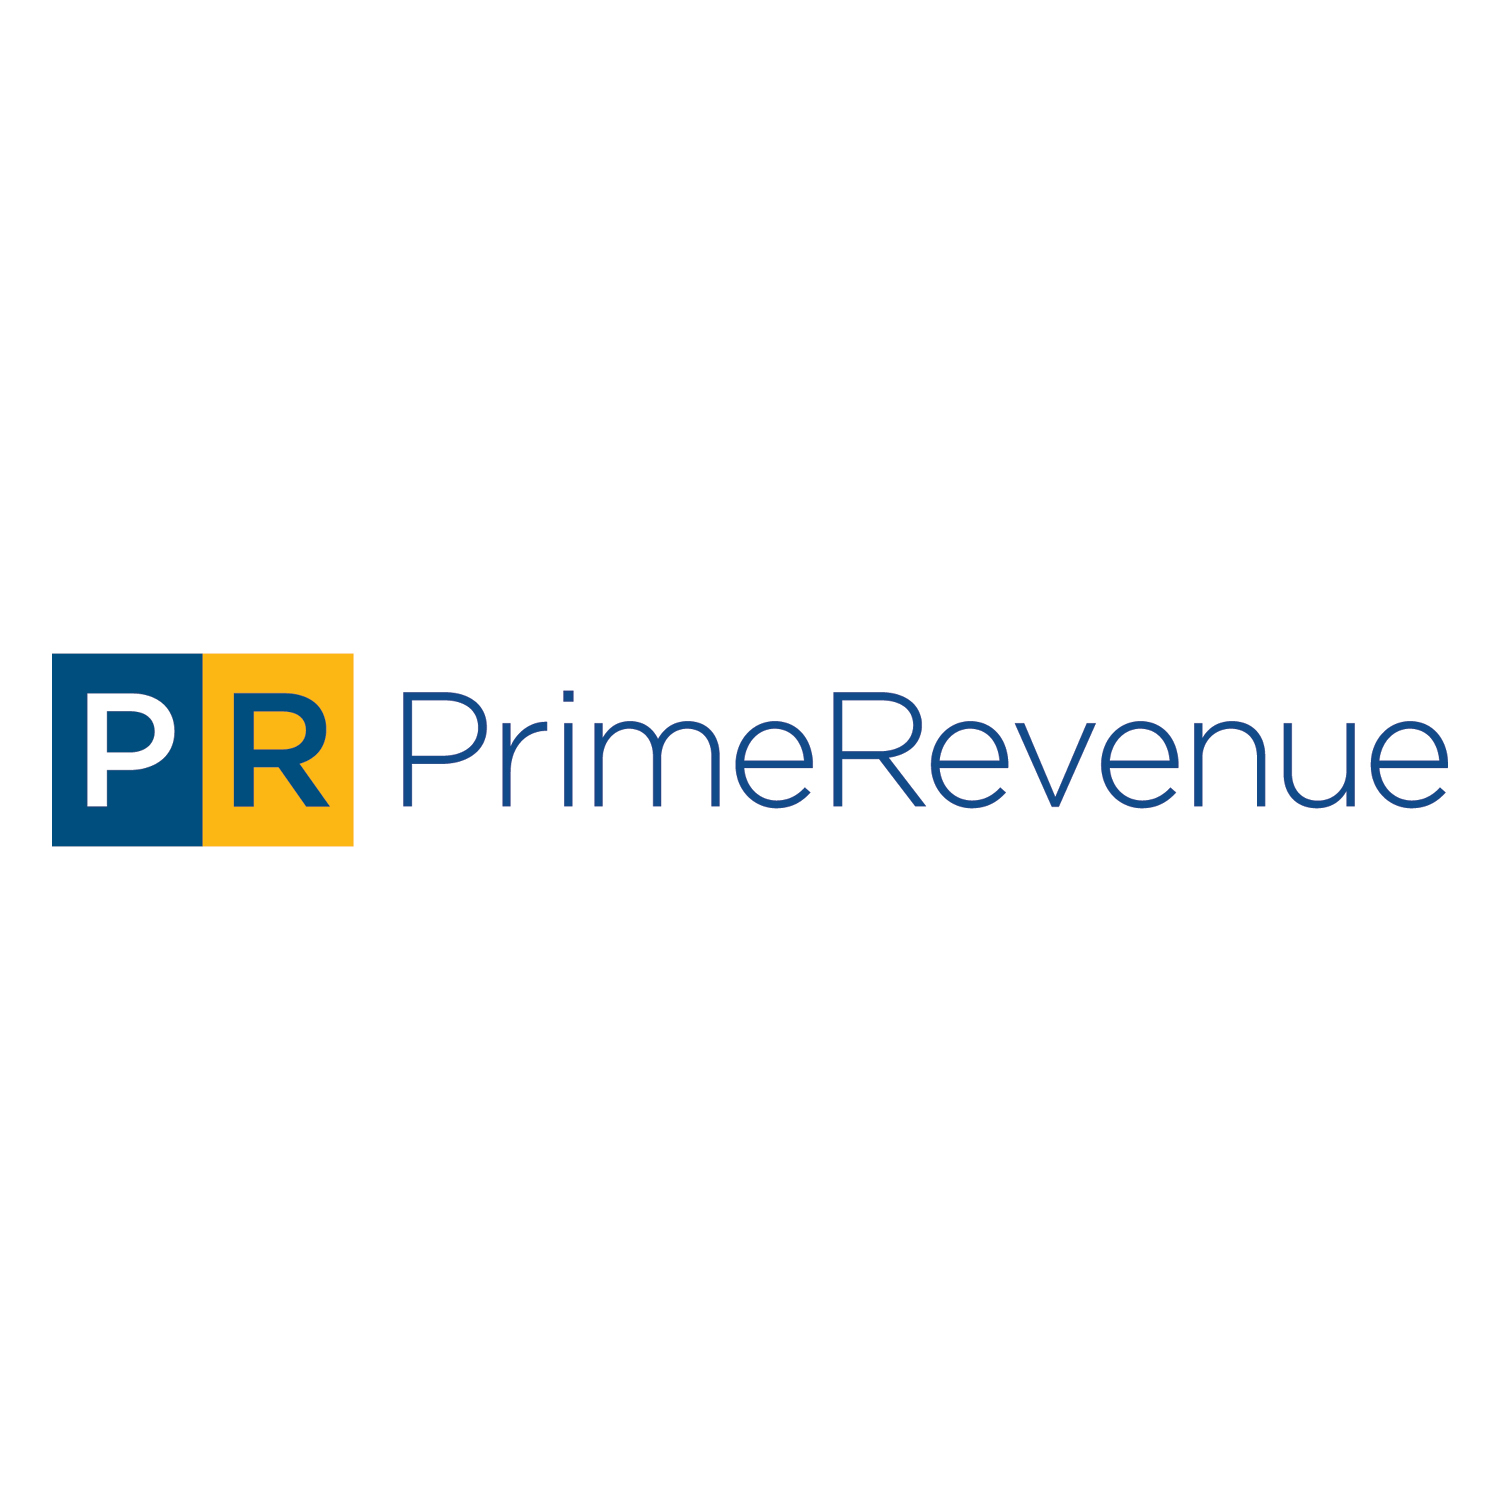 PrimeRevenue logo written in blue text with a PR icon